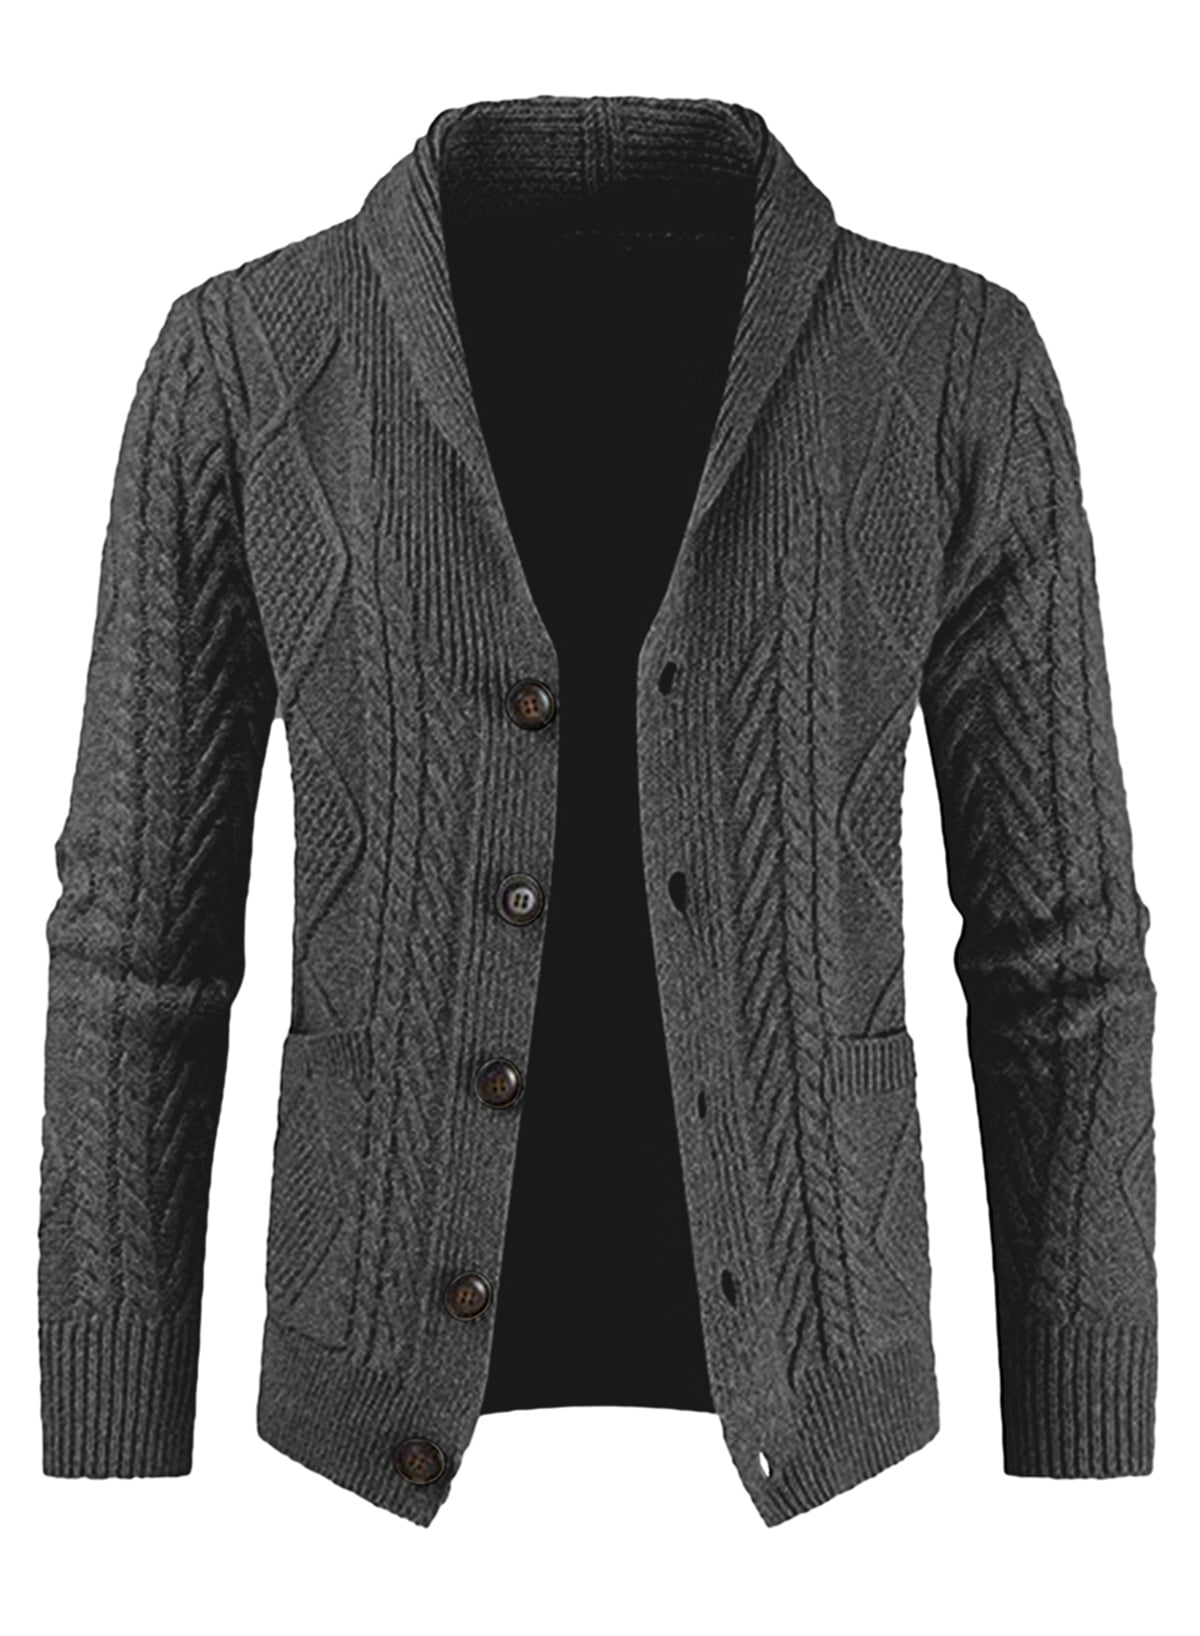 JMIERR Mens Cardigan Knitted Shawl Collar Sweaters Cable Knit Jumper ...